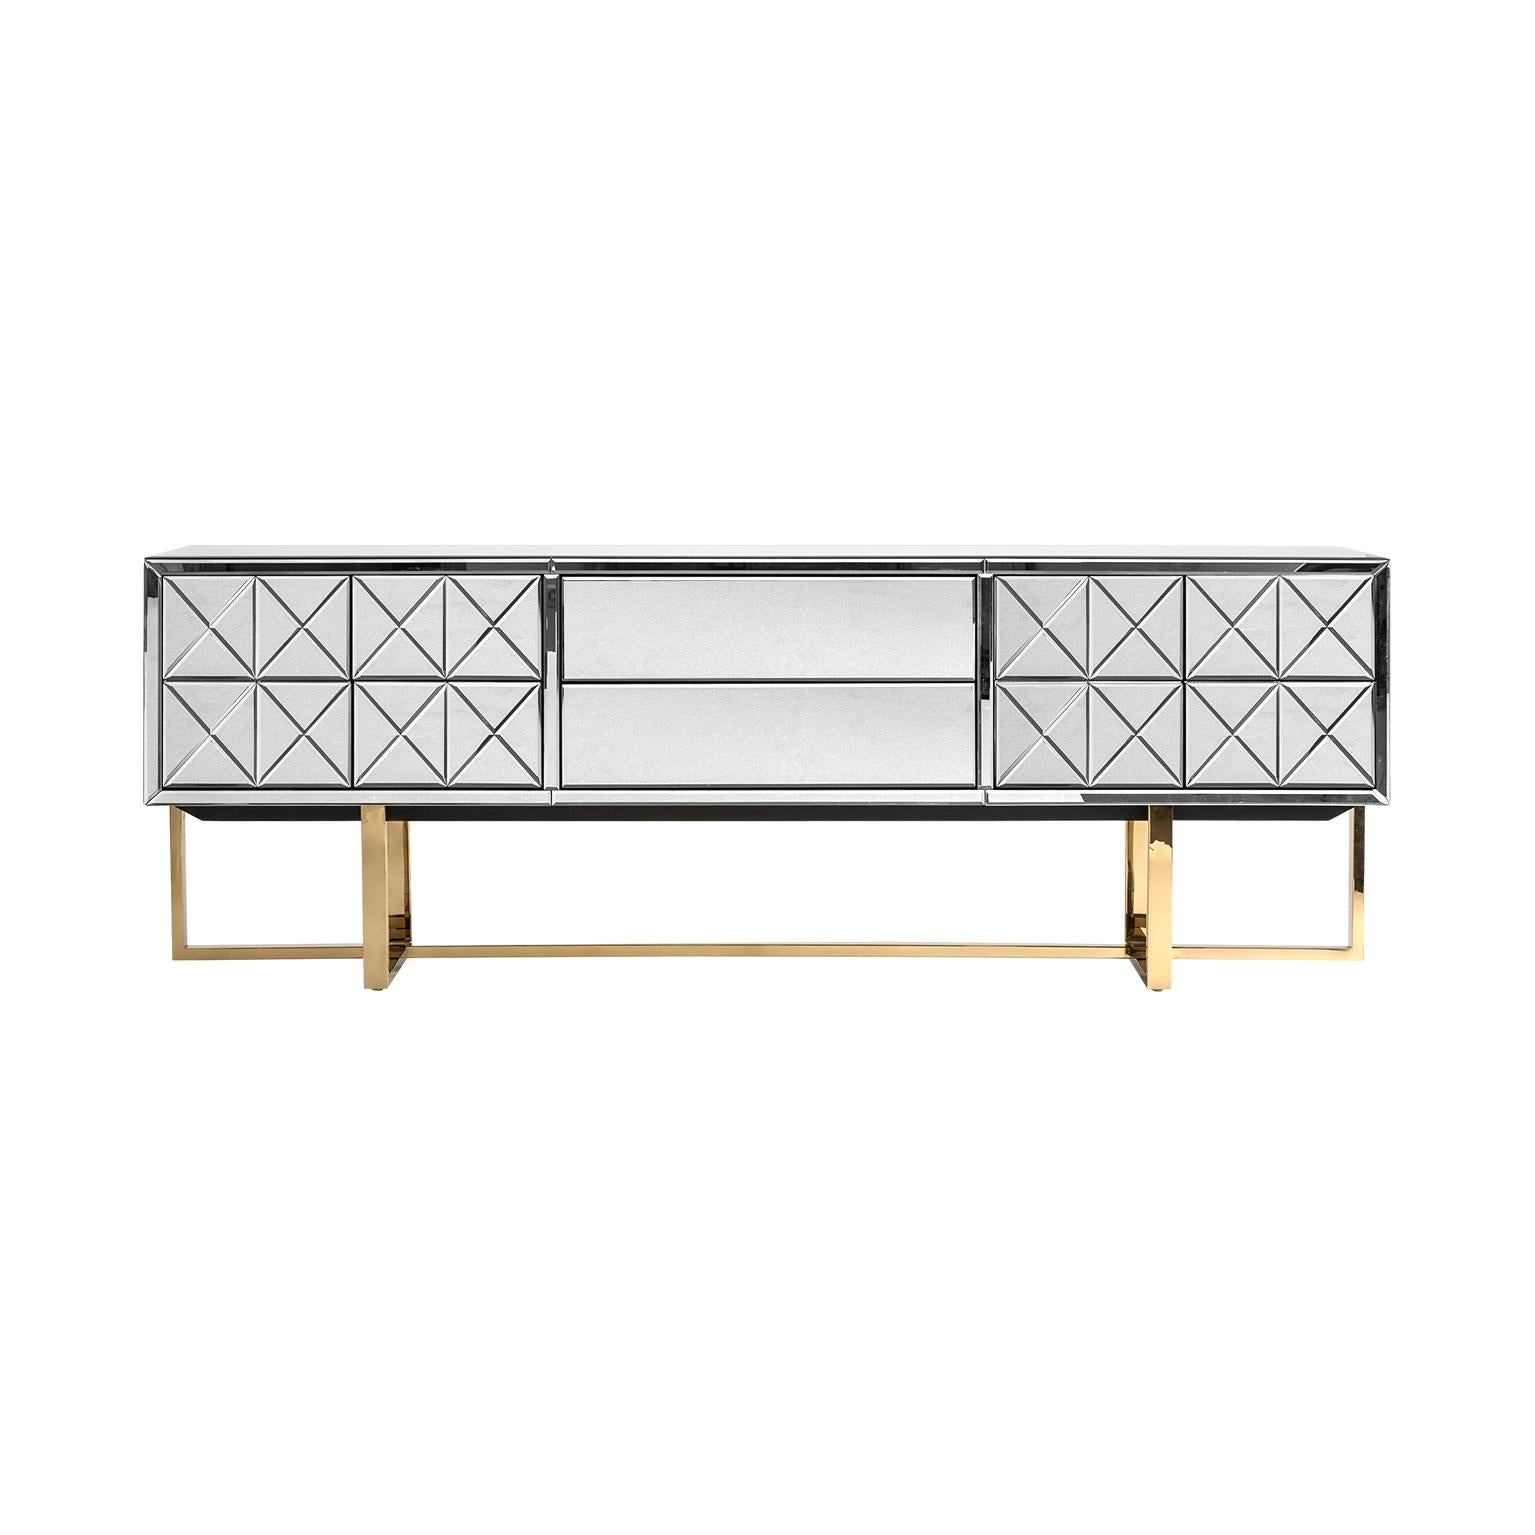 Beveled Mirrored and Gold Metal Feet Sideboard